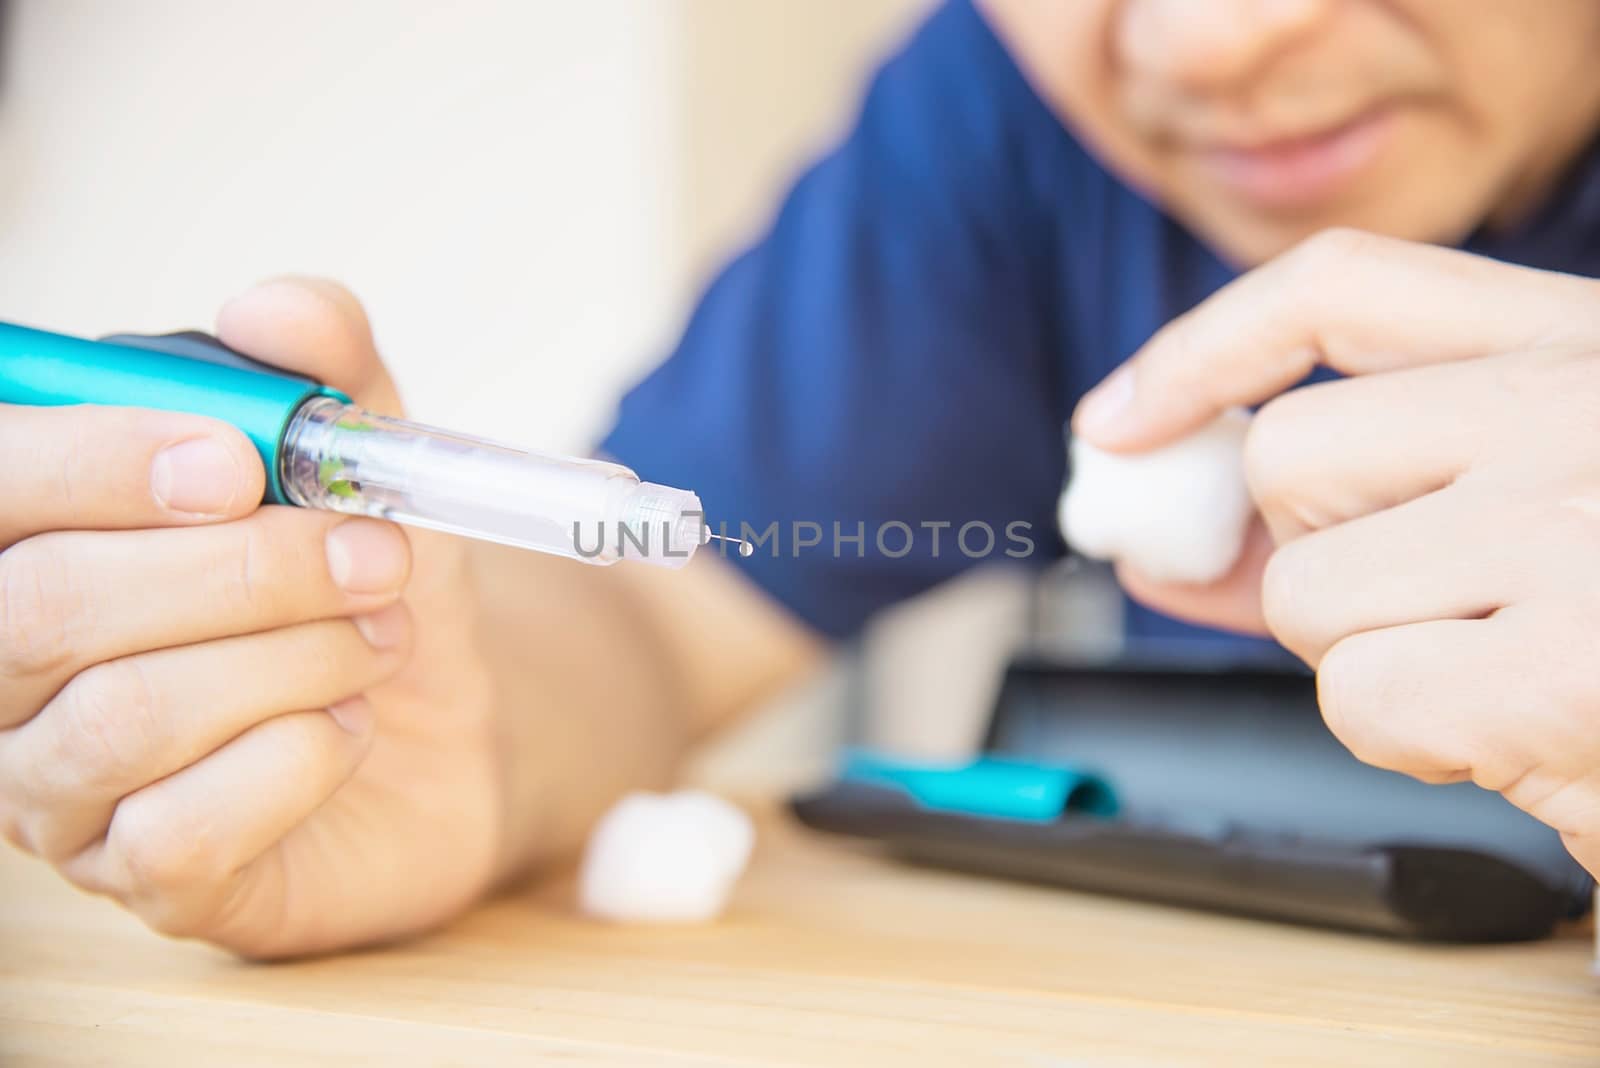 Man preparing insulin diabetic syringe for injection - people diabetic health care concept